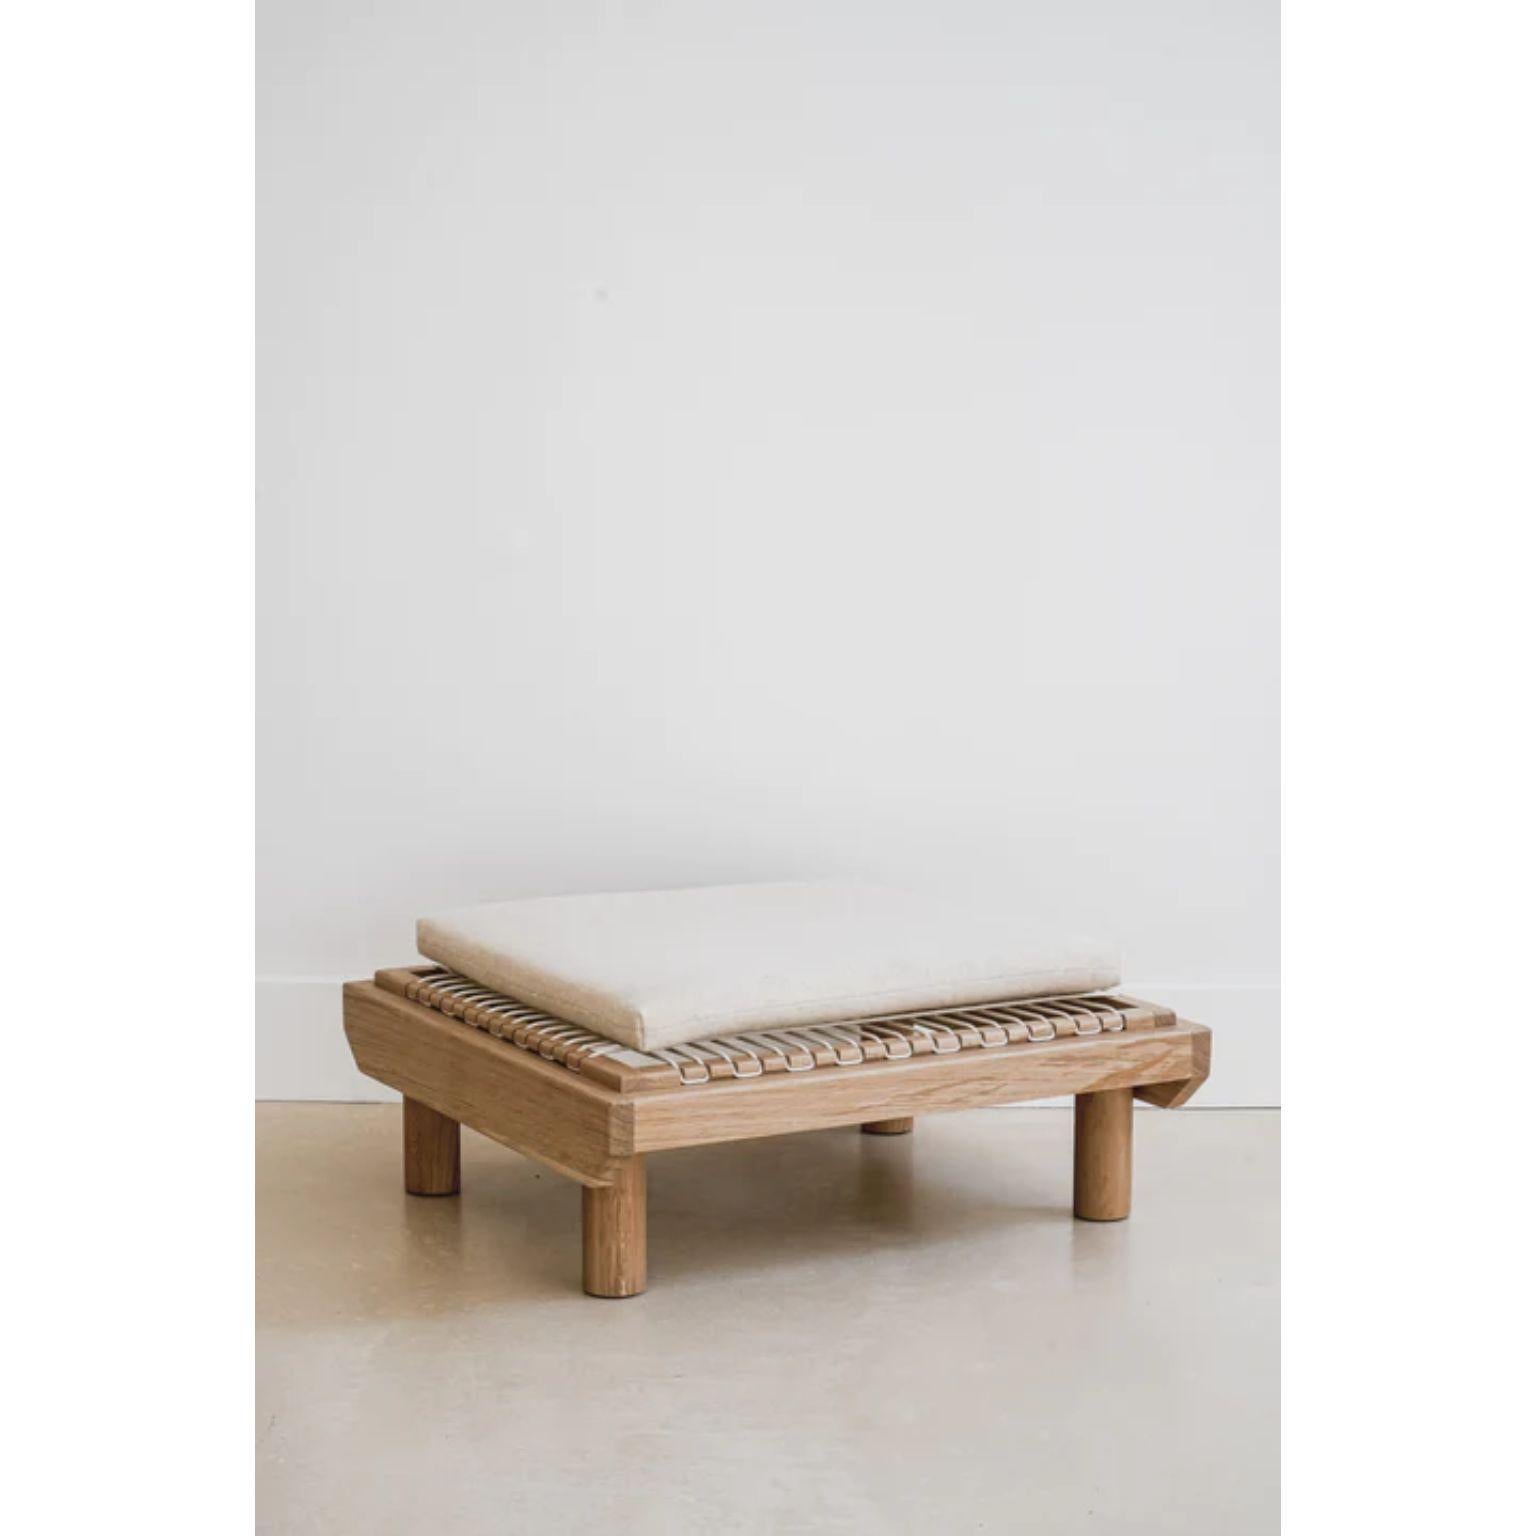 Dena Wool Ecru Ottoman by La Lune
Dimensions: D 75 x W 68 x H 31 cm.
Materials: Oak and wool.

Oak structure, mattresses and cushions in wool or linen. Produced in France. Custom sizes available. Please contact us.

La Lune is above all a project to